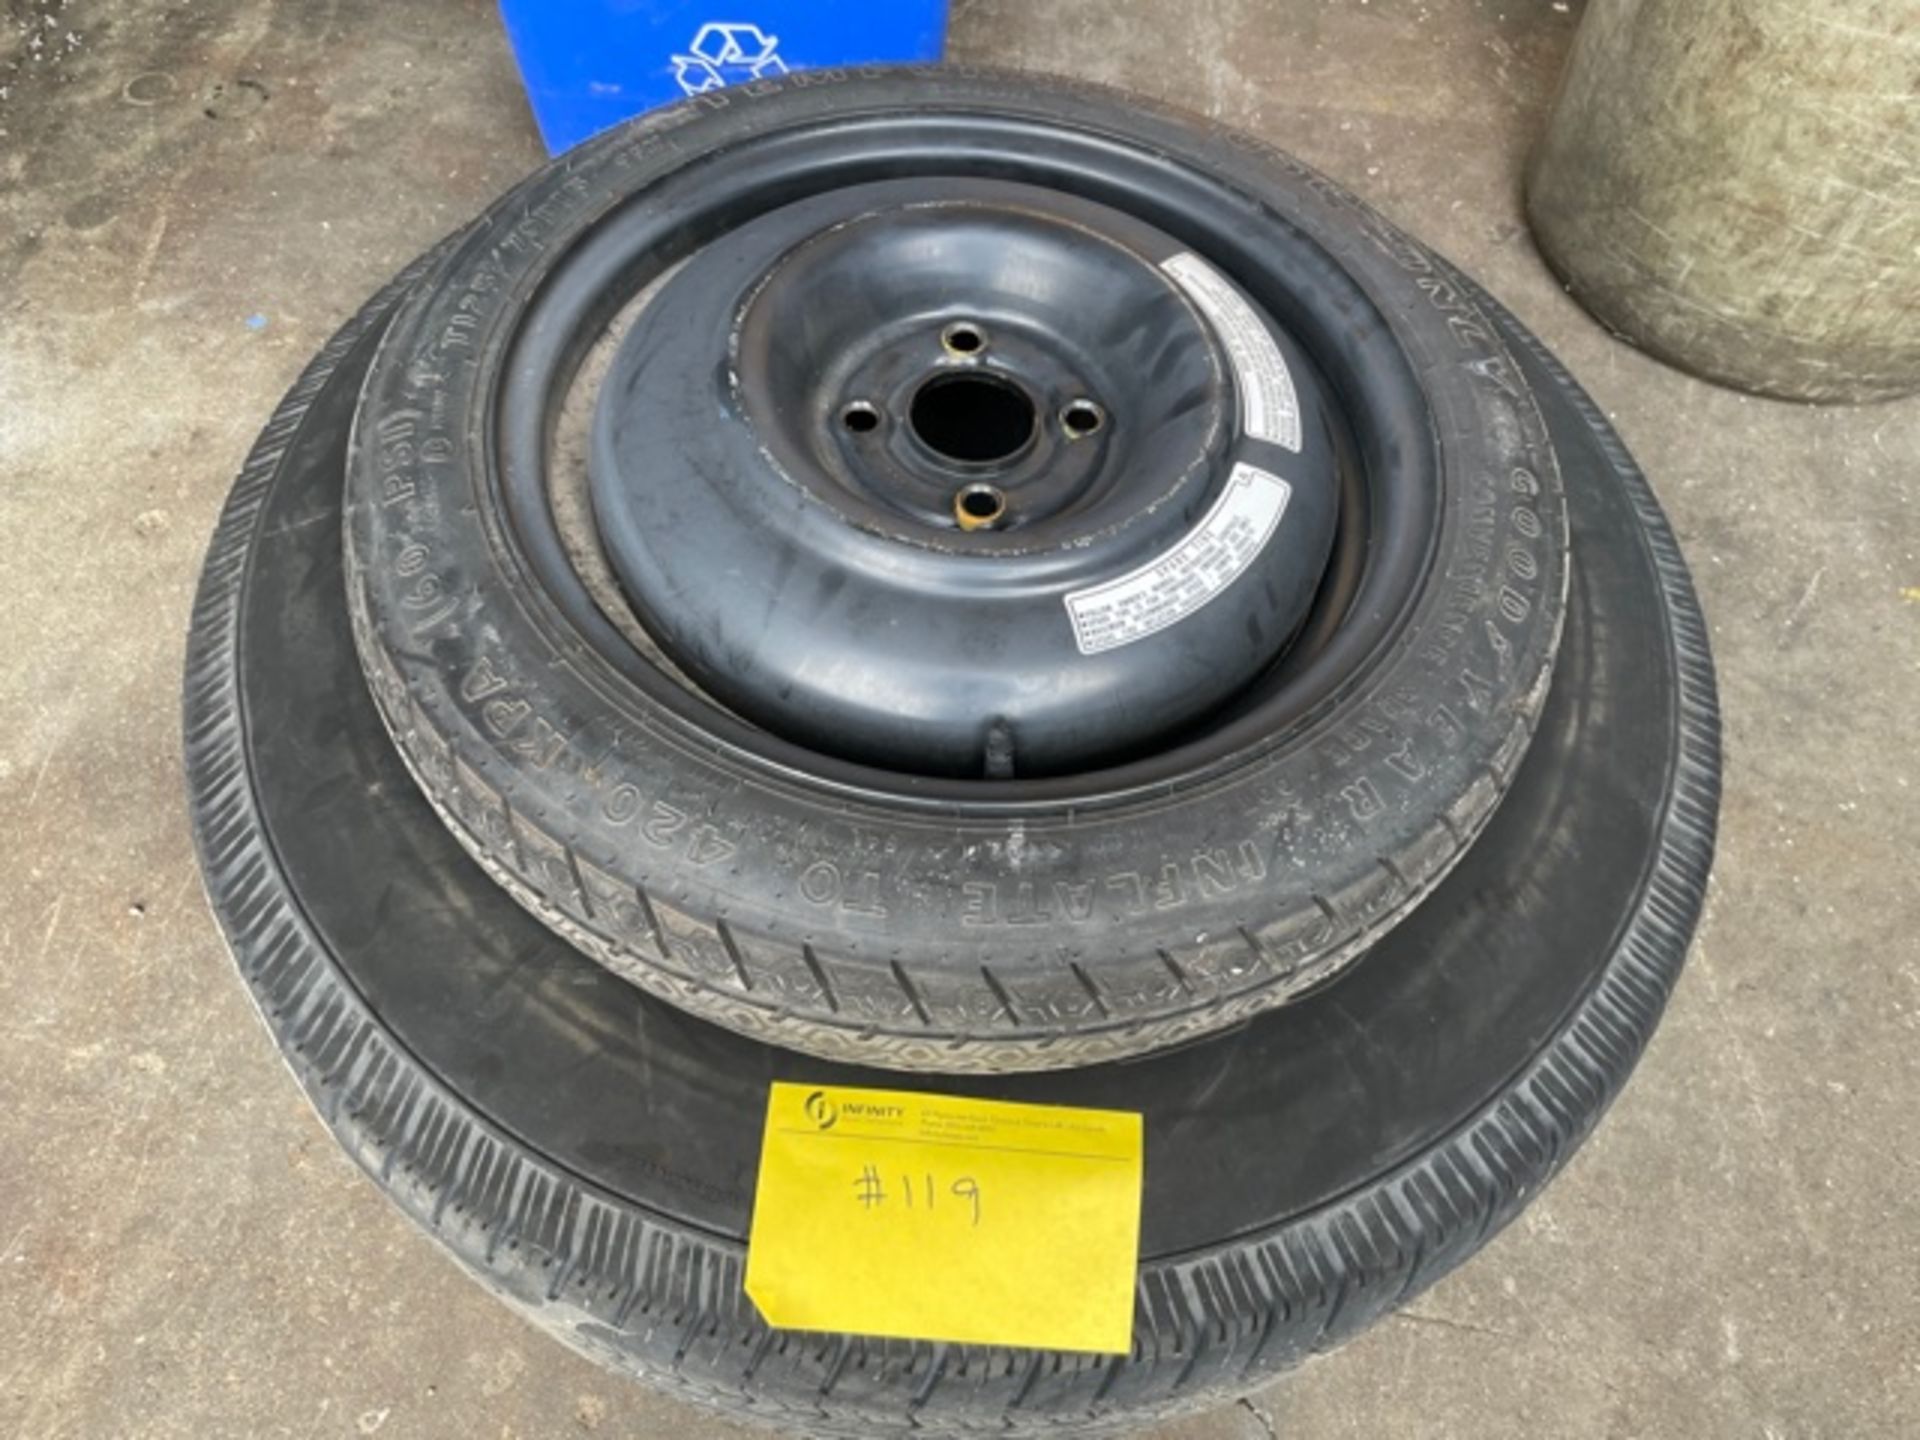 GMC Pick up truck spare tire with Rim & Honda civic spare tire with Rim